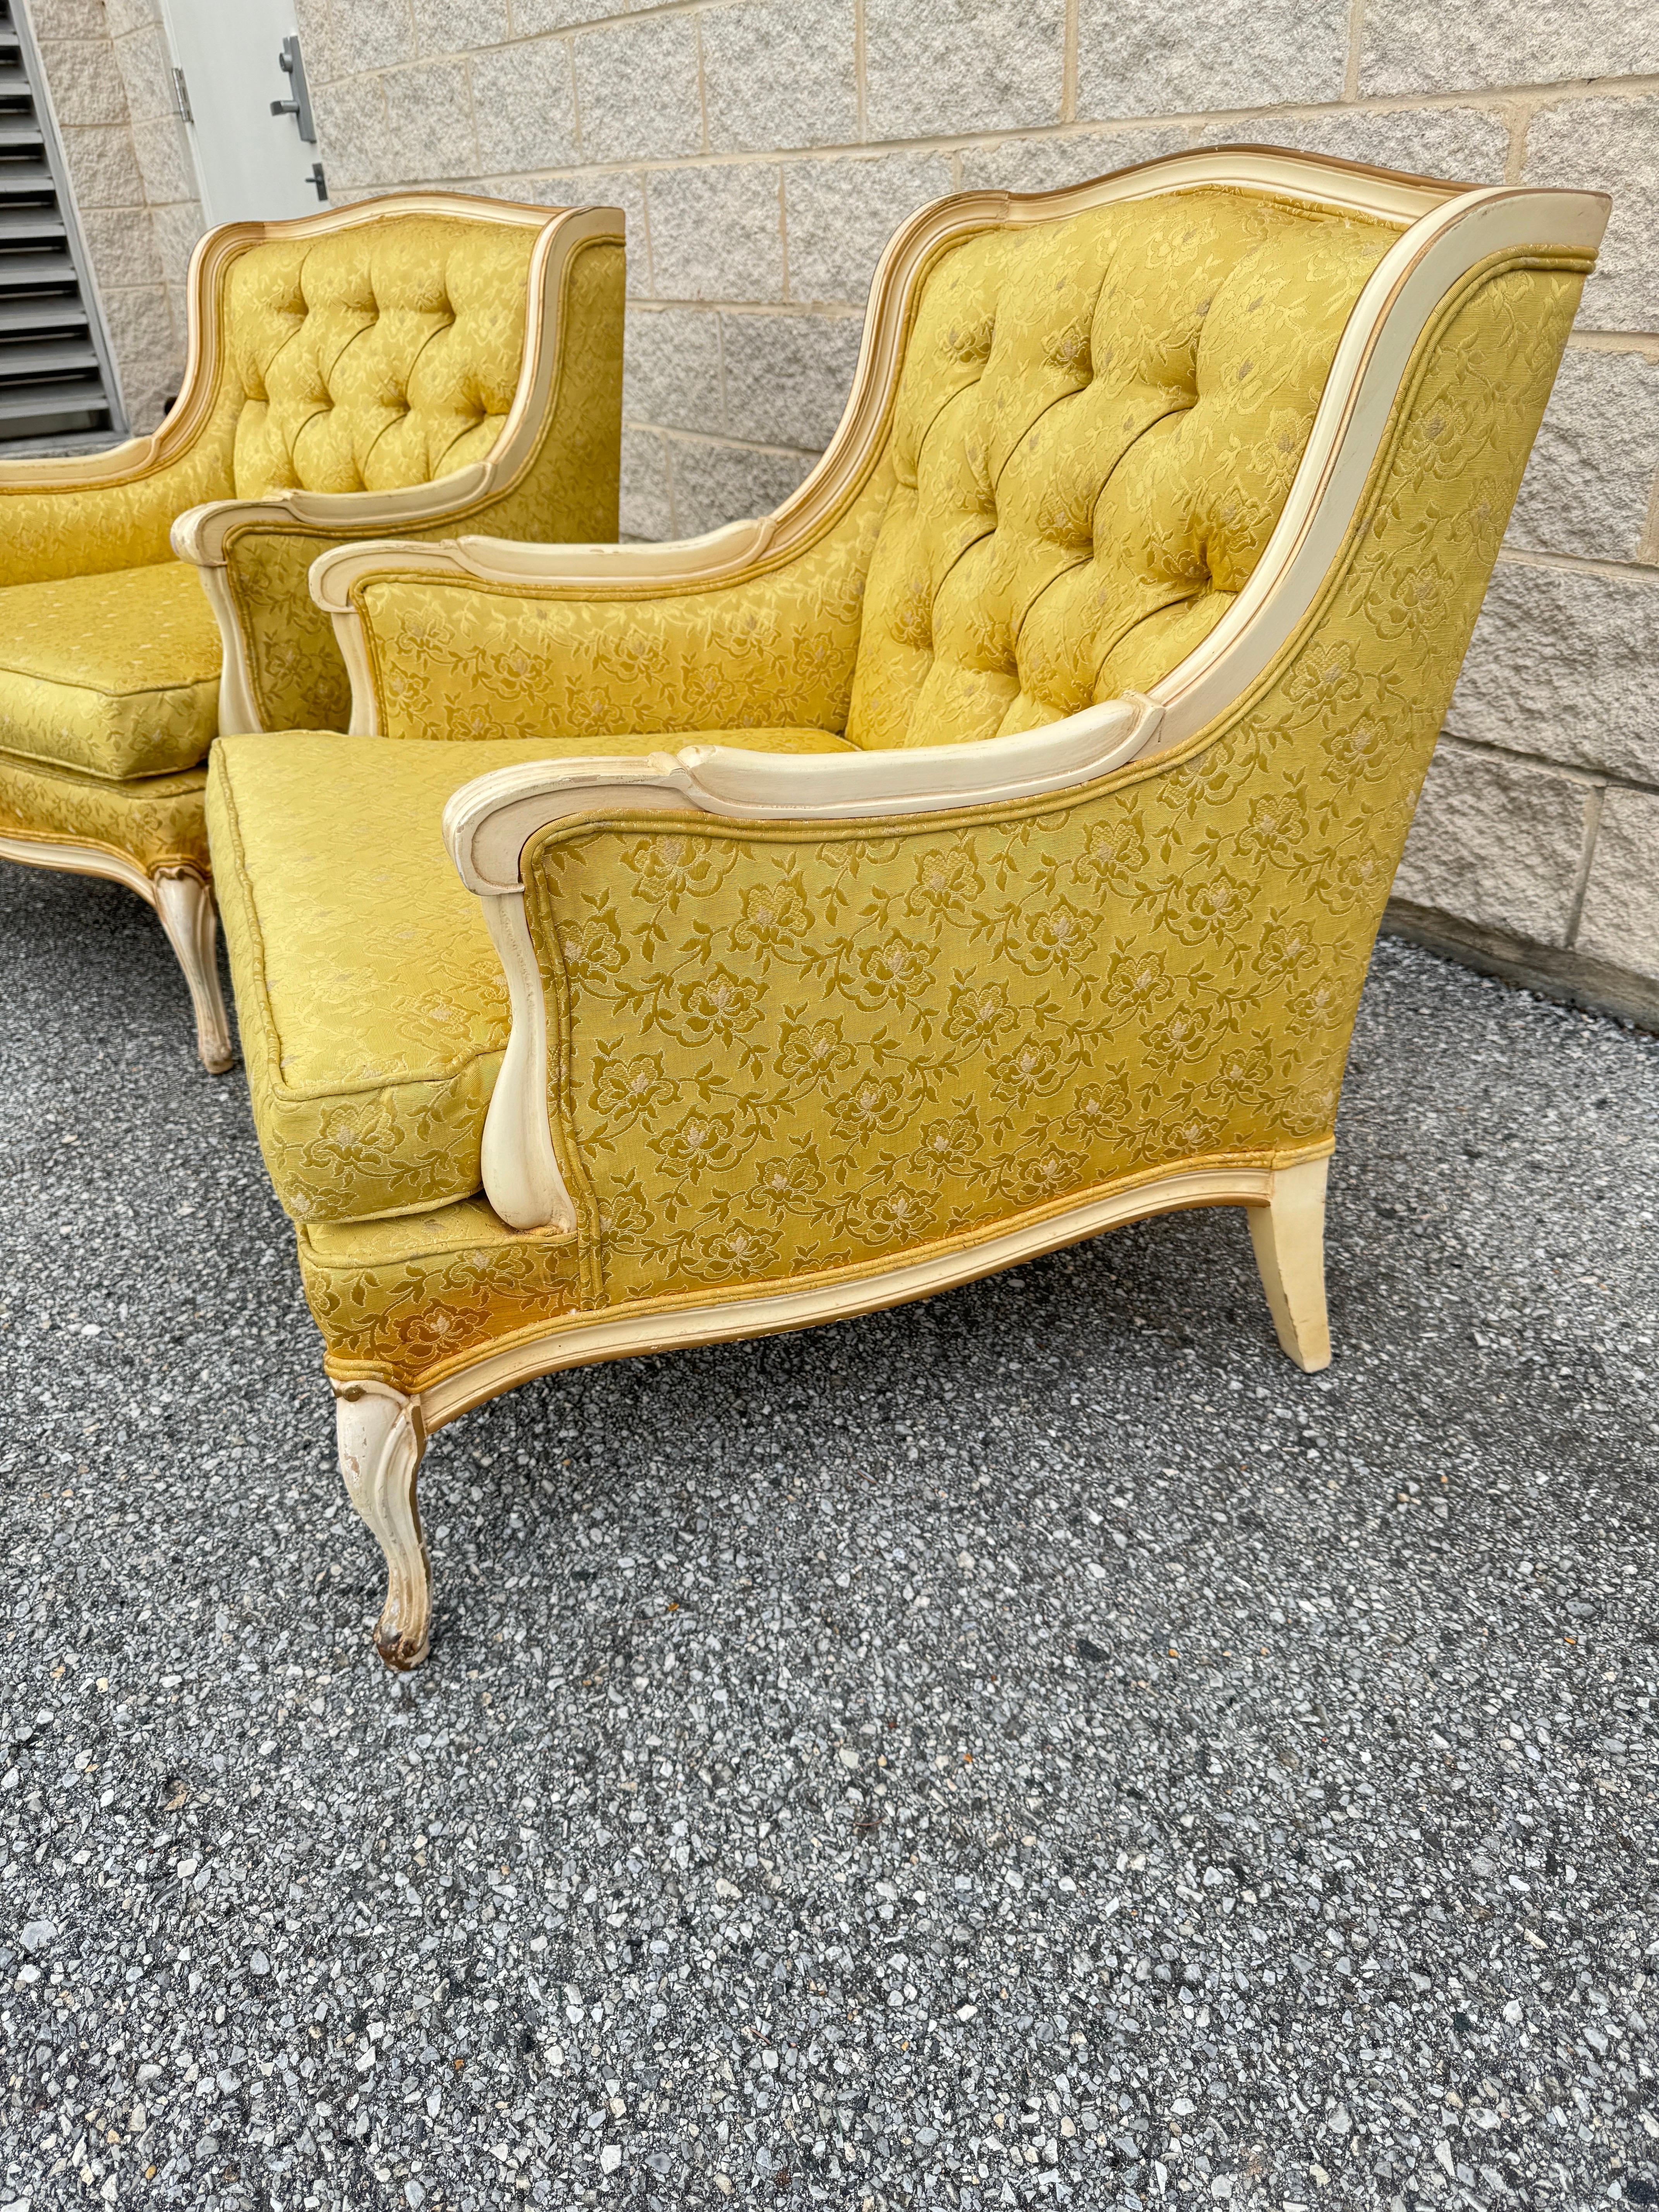 1950s French Bergere Wing Armchairs - a Pair 2